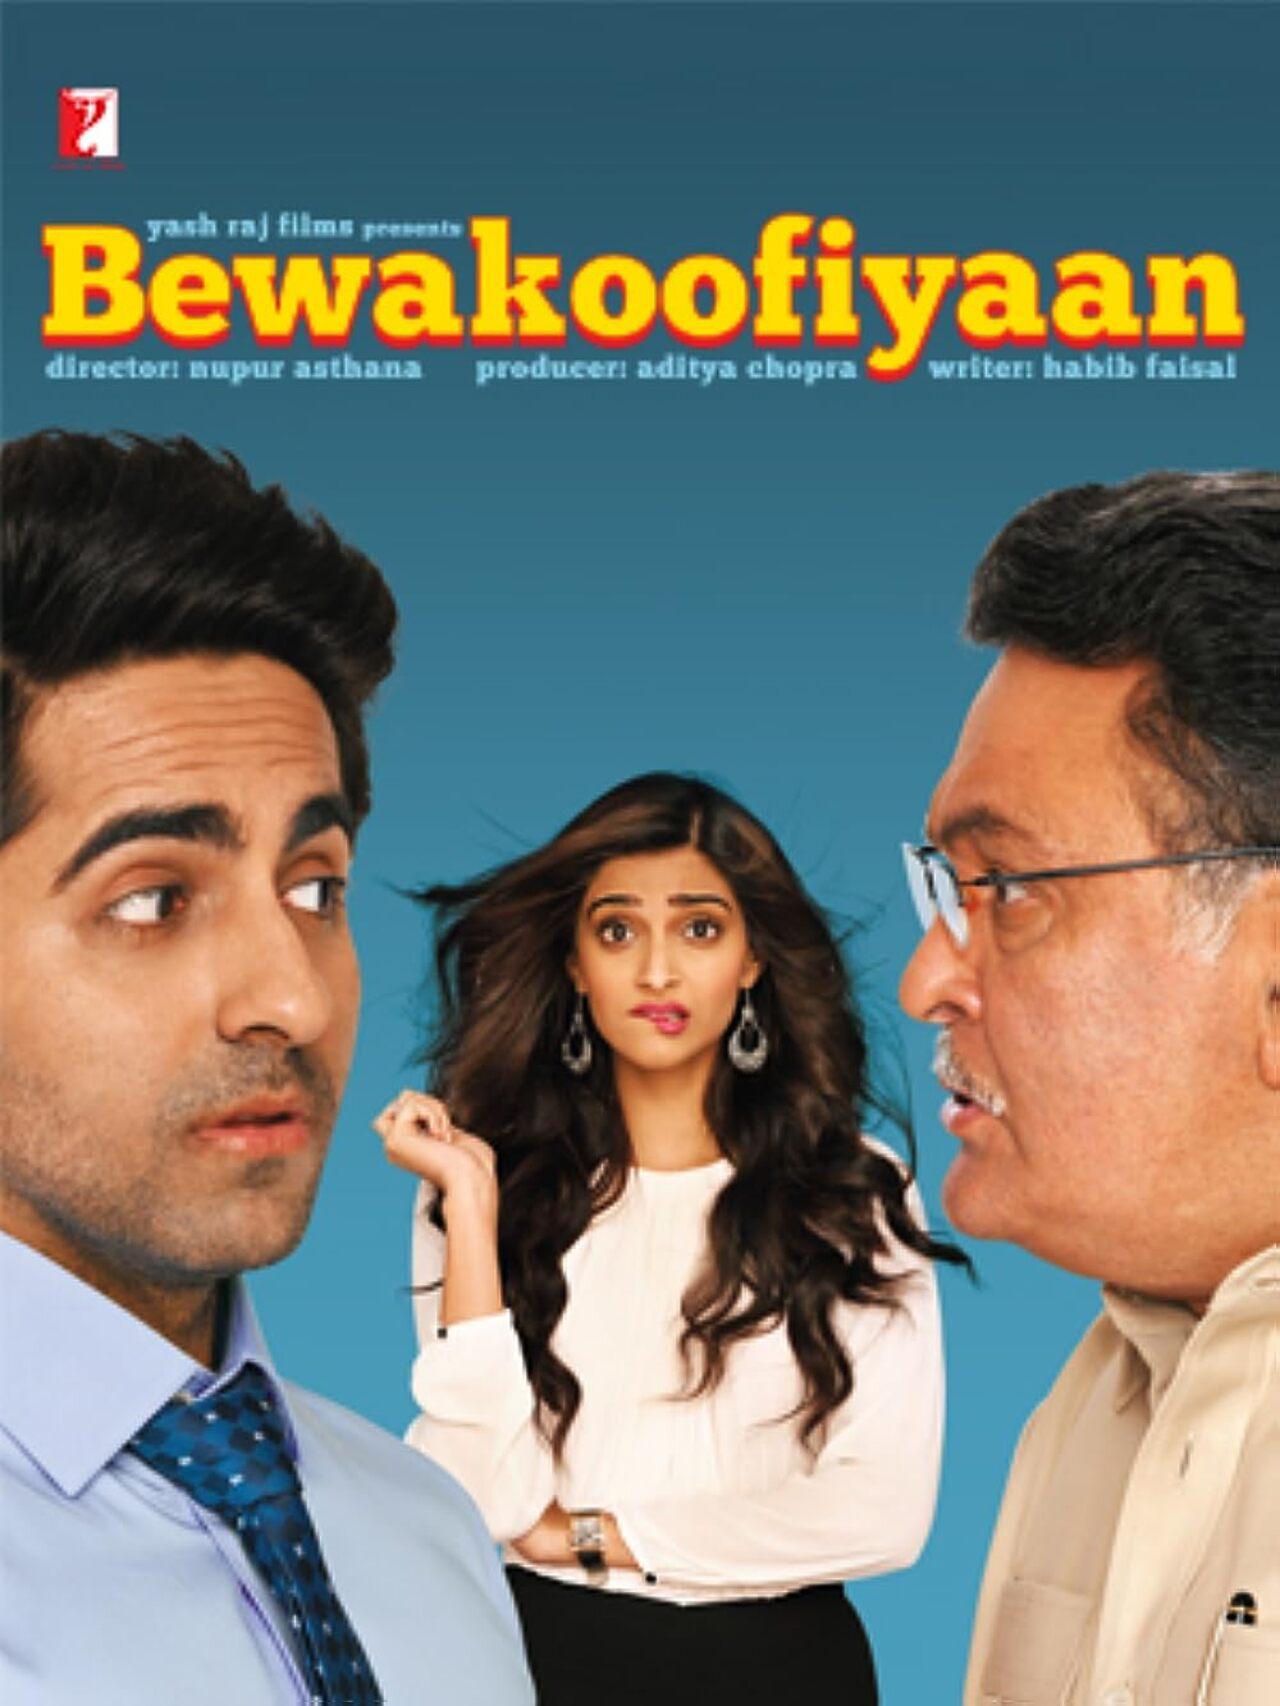 'Bewakoofiyaan' is a 2014 Bollywood romantic comedy film starring Ayushmann Khurrana and Sonam Kapoor. The film explores the challenges faced by a couple when their relationship is put to the test by financial hardships. With humour and heart, it delves into love, ambition, and the complexities of modern relationships